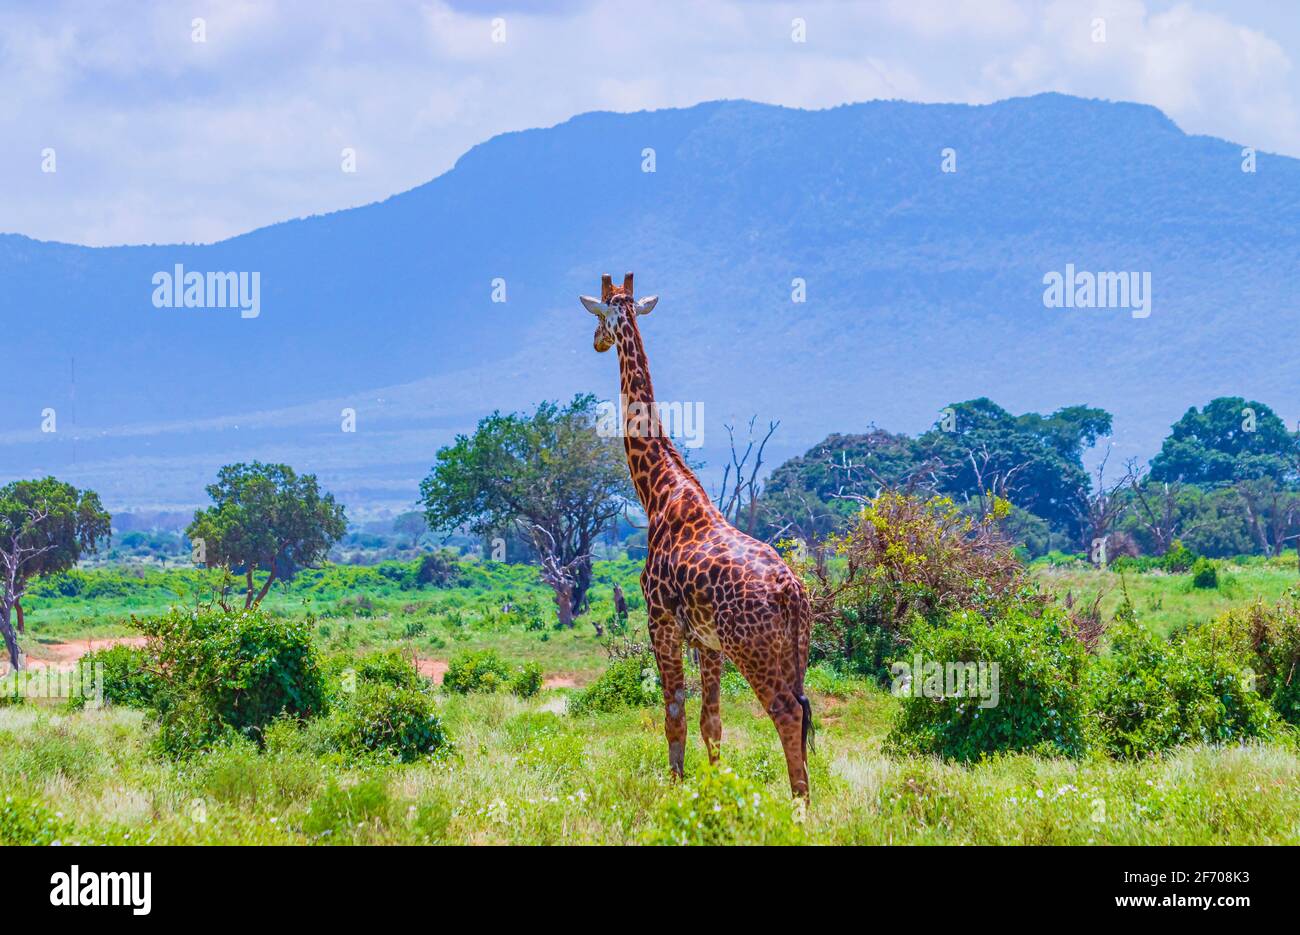 Giraffe standing in tall grass in Tsavo East National Park, Kenya.Kilimanjaro is in the background. It is a wild life photo. It's a beautiful day. Stock Photo